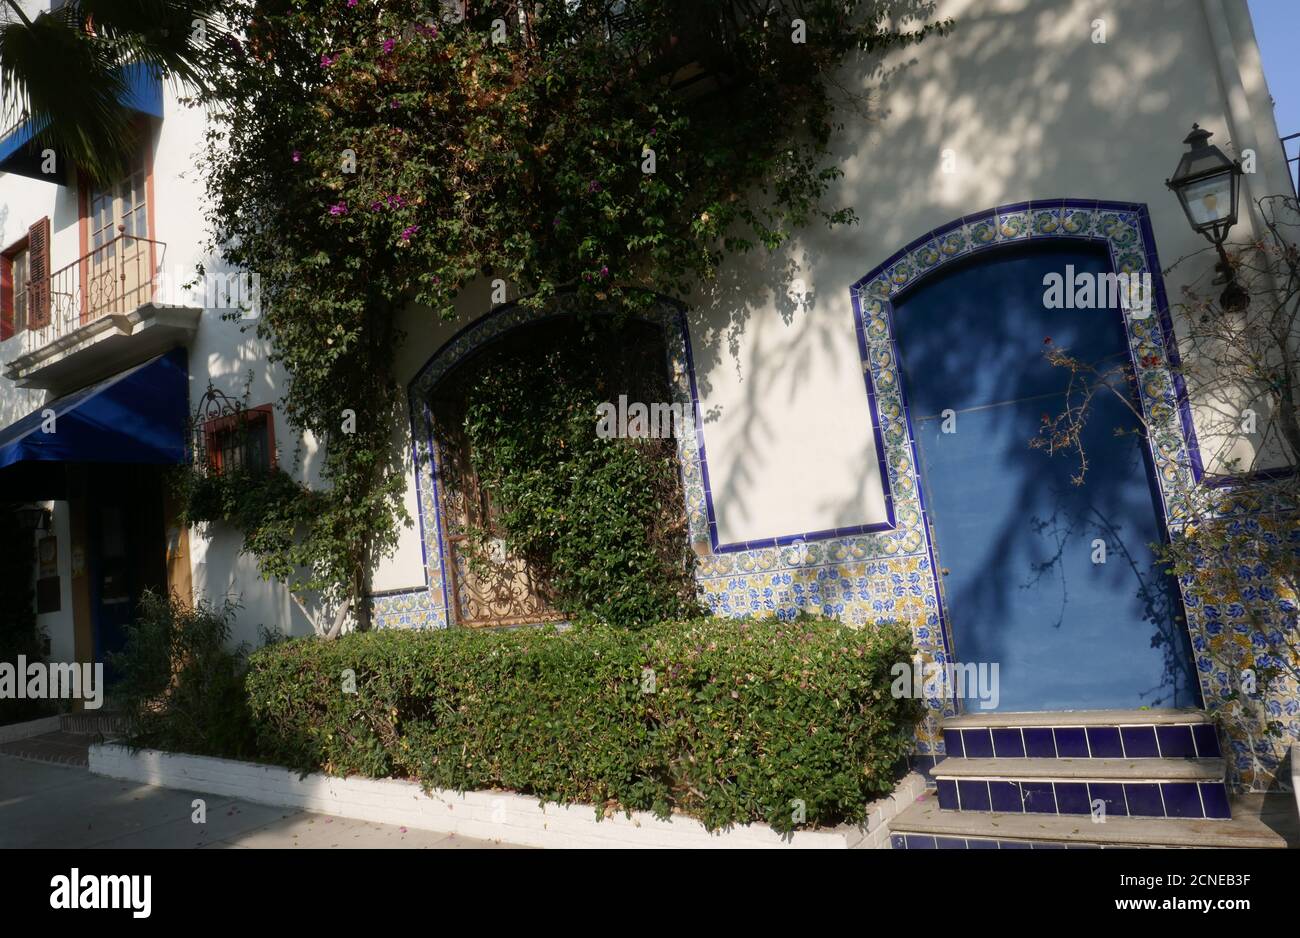 West Hollywood, California, USA 17th September 2020 A general view of atmosphere of Historic building Mi Casa, La Ronda, former home of Cary Grant and Bette Davis at 1400-1313 N. Havenhurst Drive on September 17, 2020 in West Hollywood, California, USA. Photo by Barry King/Alamy Stock Photo Stock Photo